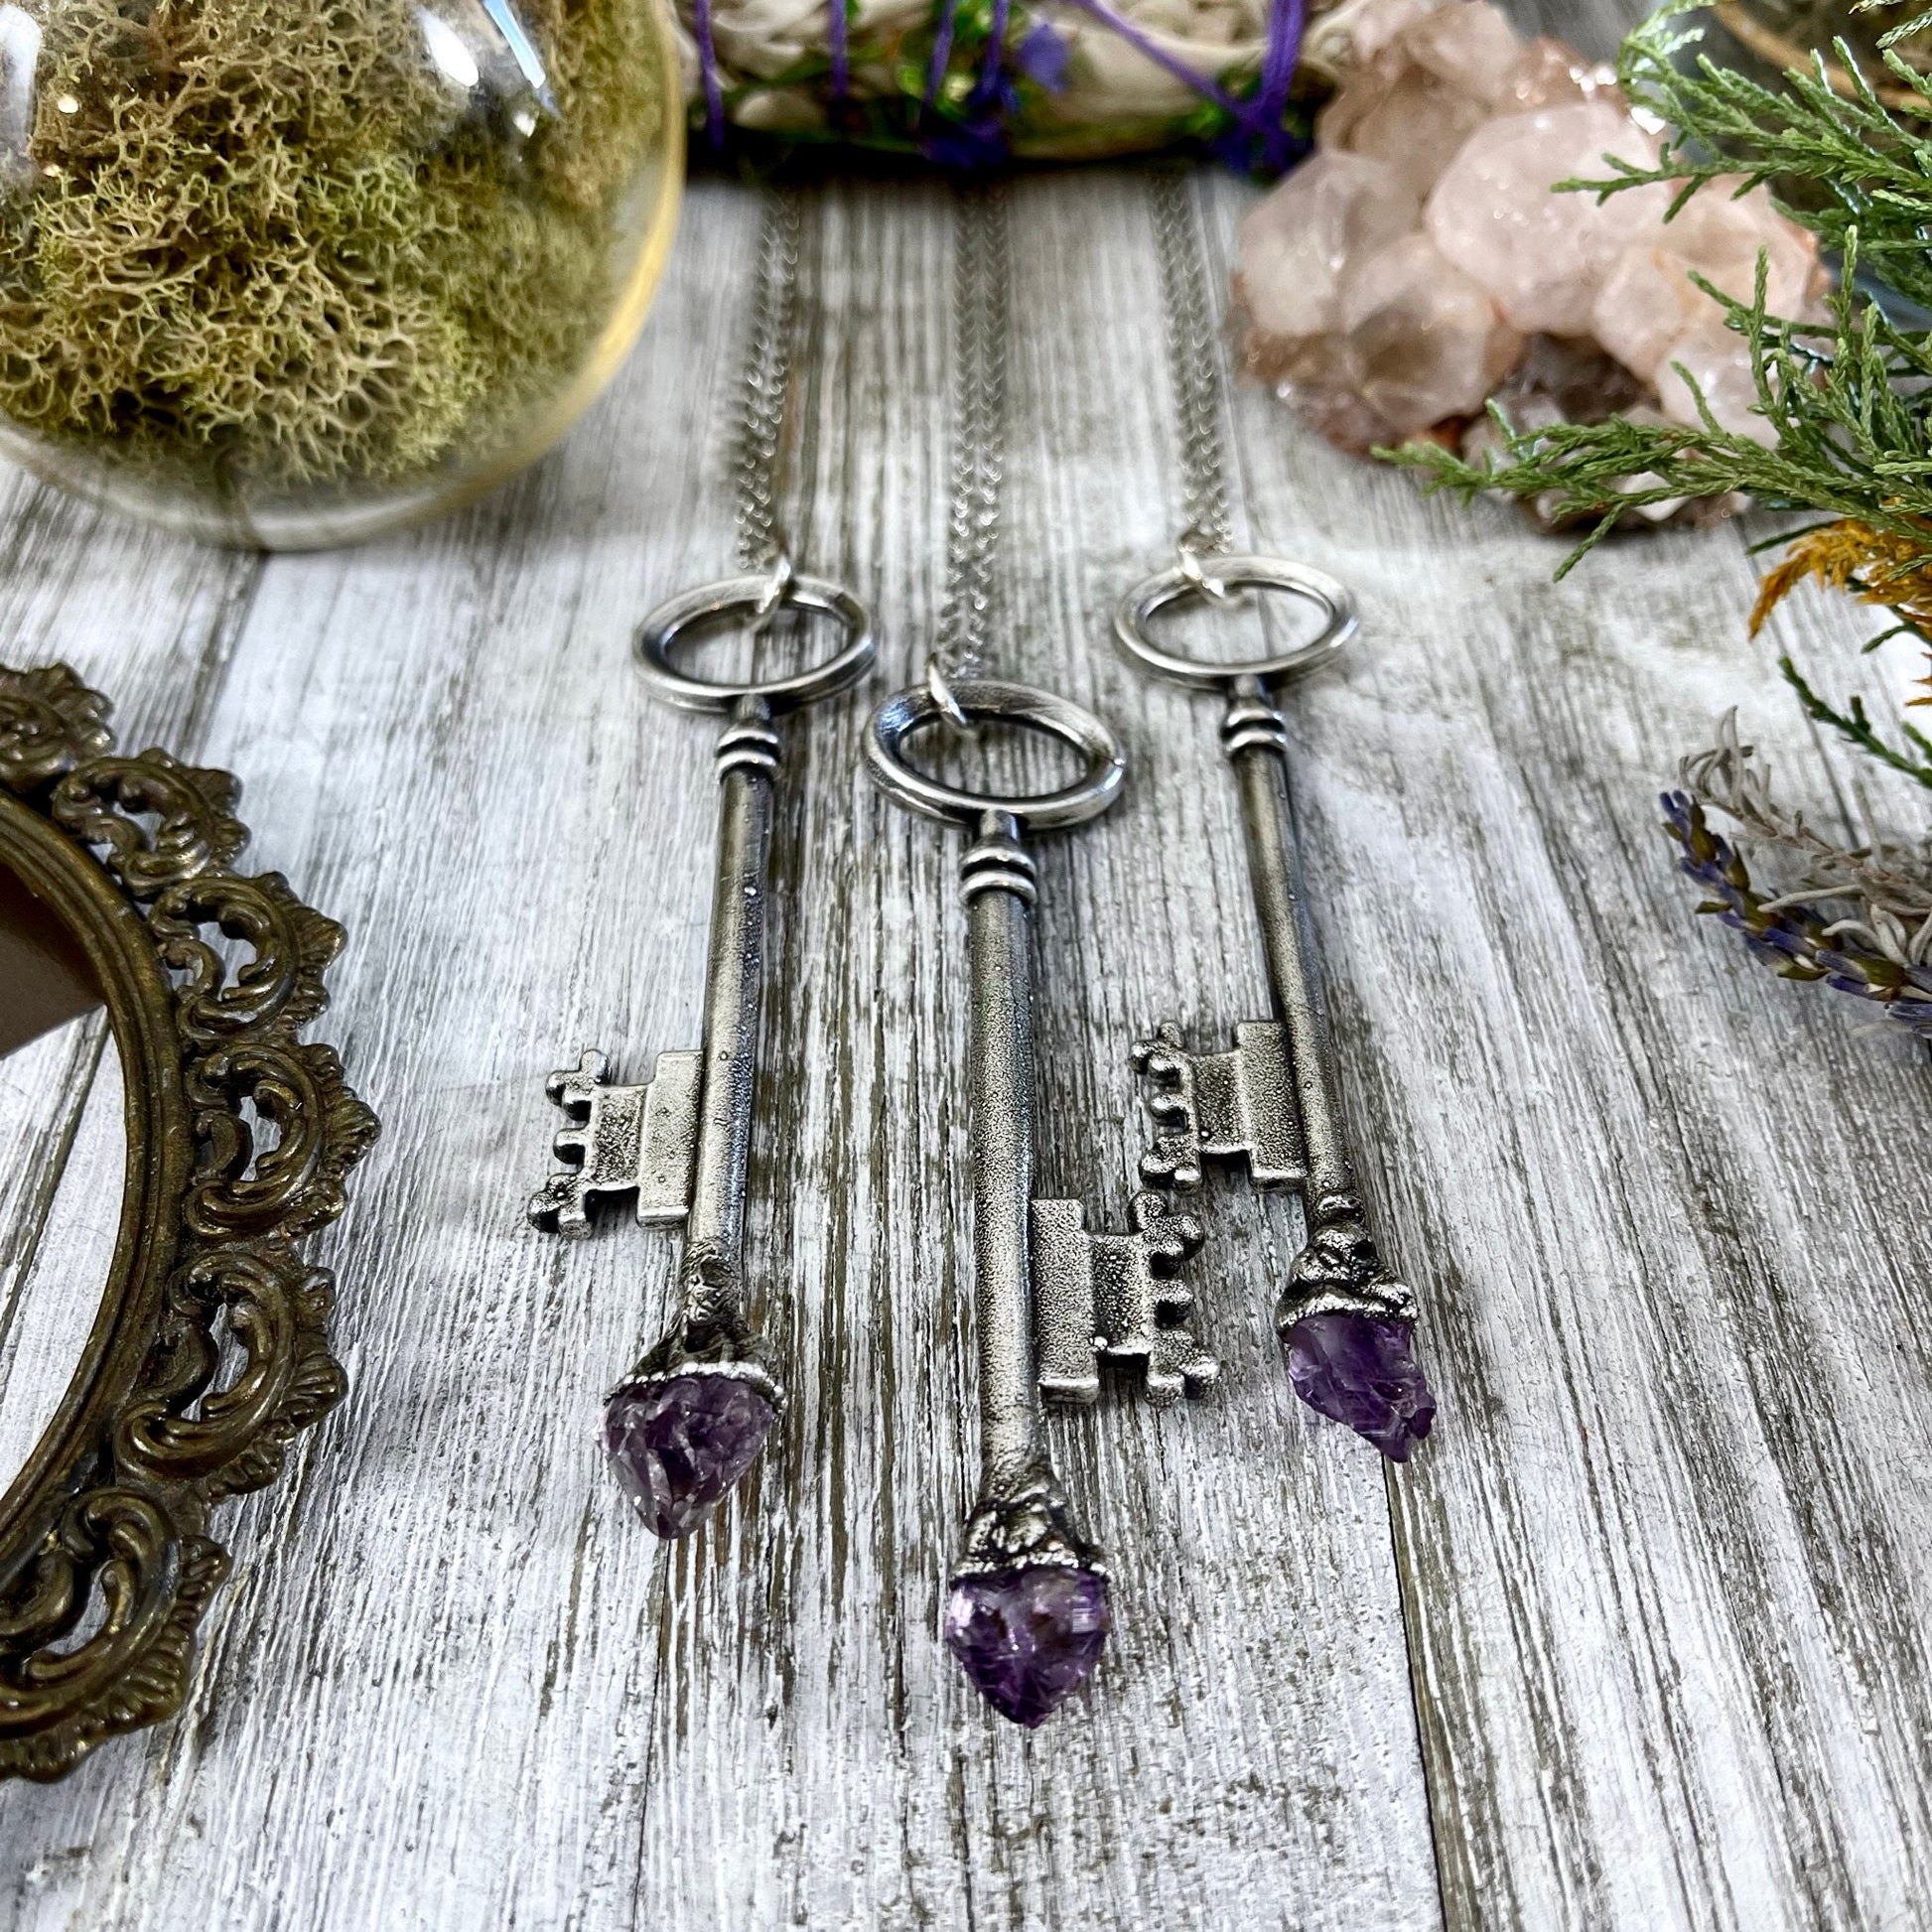 antique key necklace, Crystal Necklaces, Etsy ID: 1119611011, FOXLARK- NECKLACES, Gothic Jewelry, Jewelry, Necklaces, Raw Amethyst Jewelry, raw crystal jewelry, Raw crystal necklace, Raw Crystal Pendant, Raw Stone Jewelry, Skeleton Key, Steampunk Jewelry,